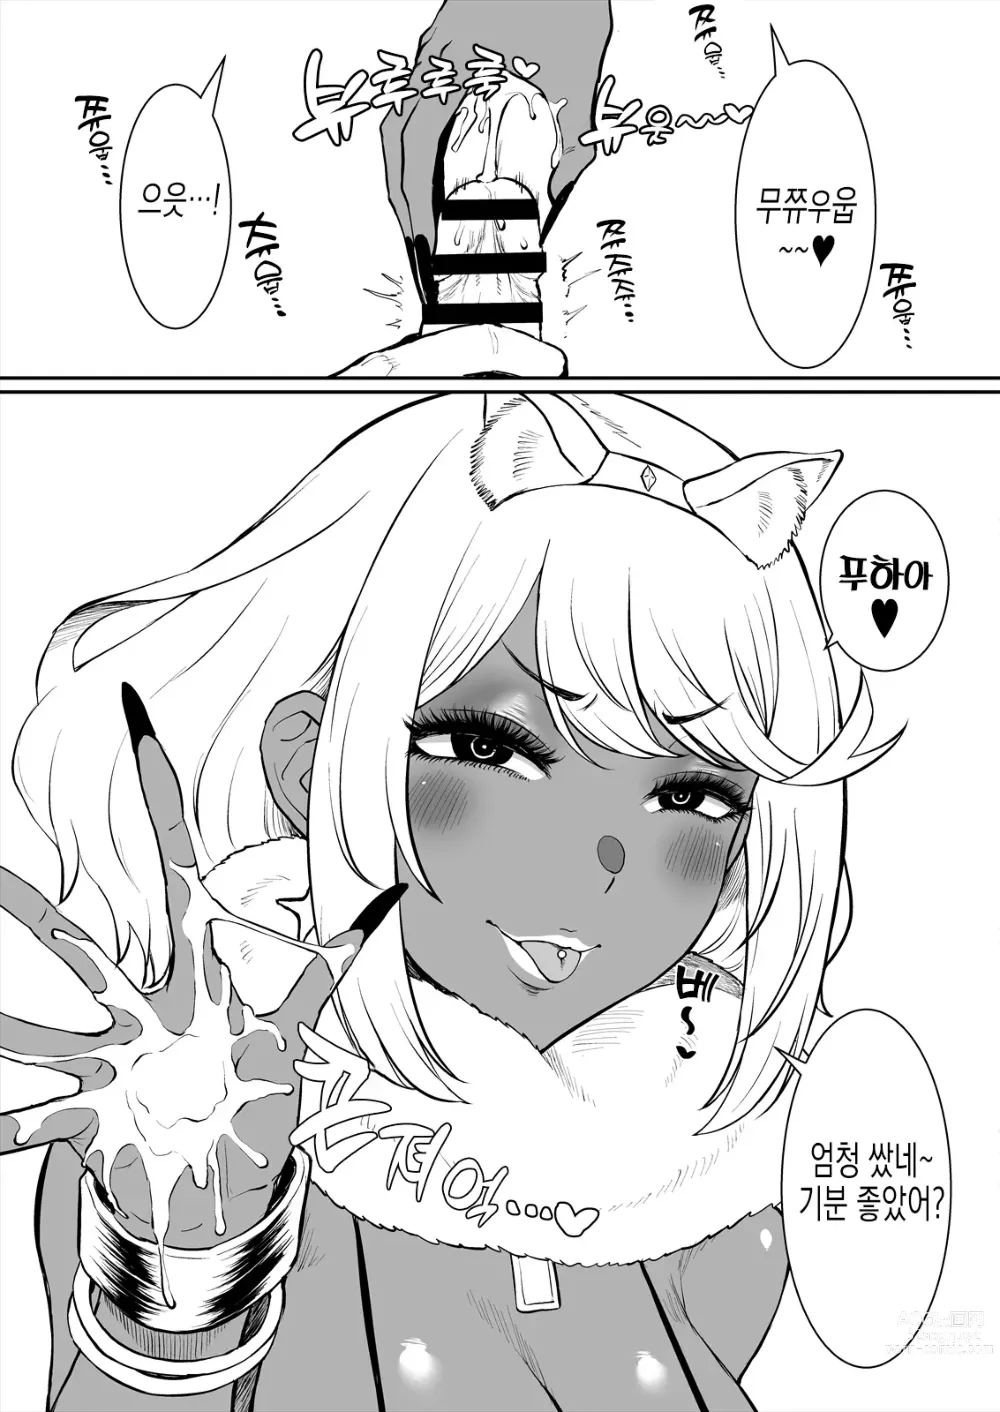 Page 7 of doujinshi 갸루 호무